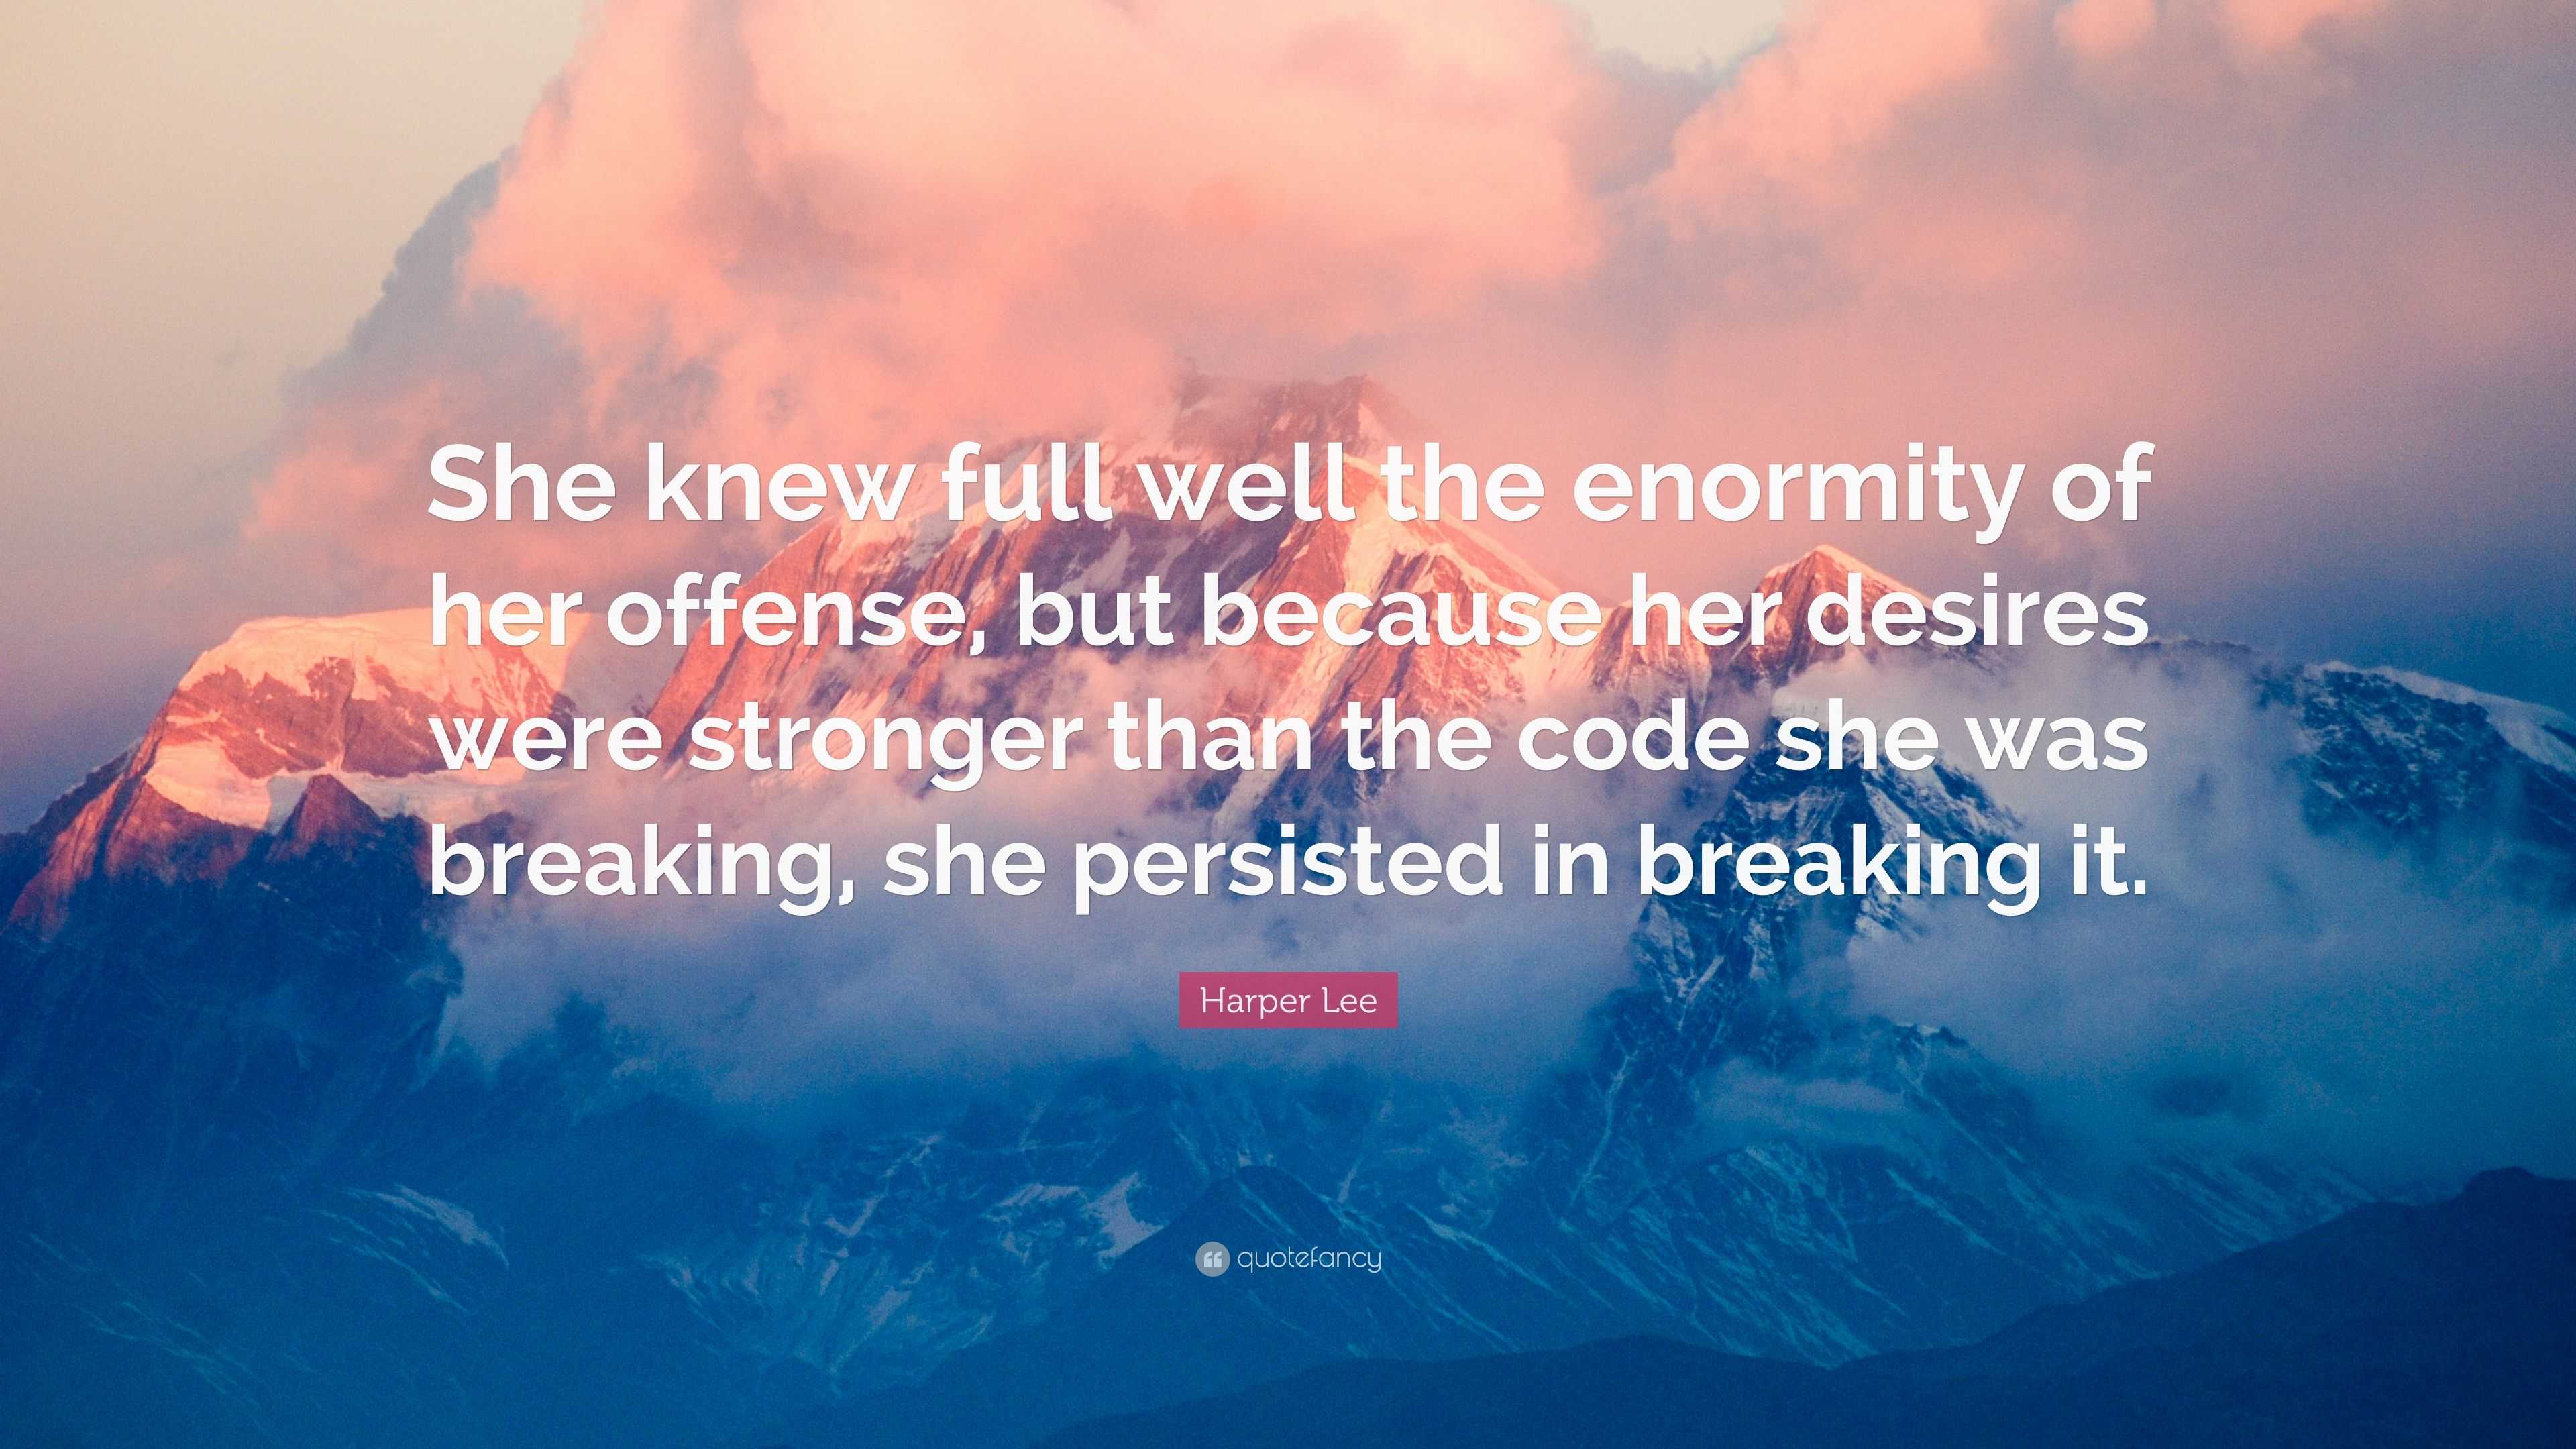 Harper Lee Quote: “She knew full well the enormity of her offense, but ...